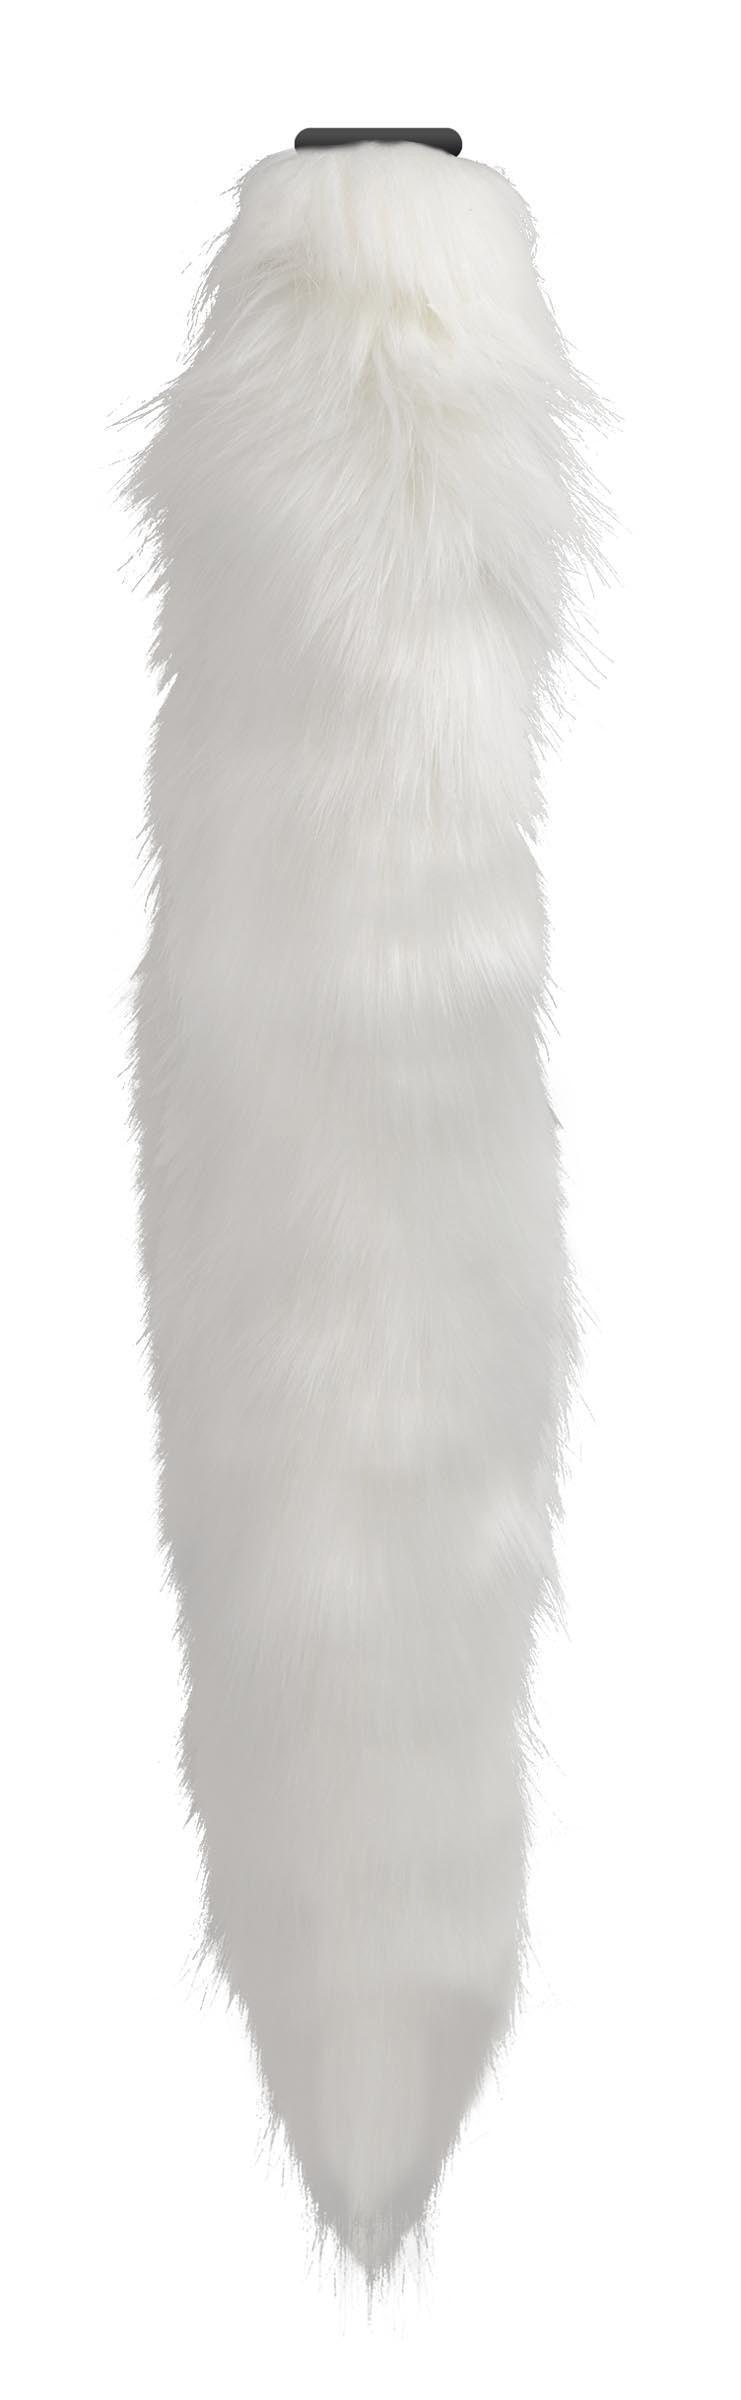 Interchangeable White Fox Tail - My Sex Toy Hub